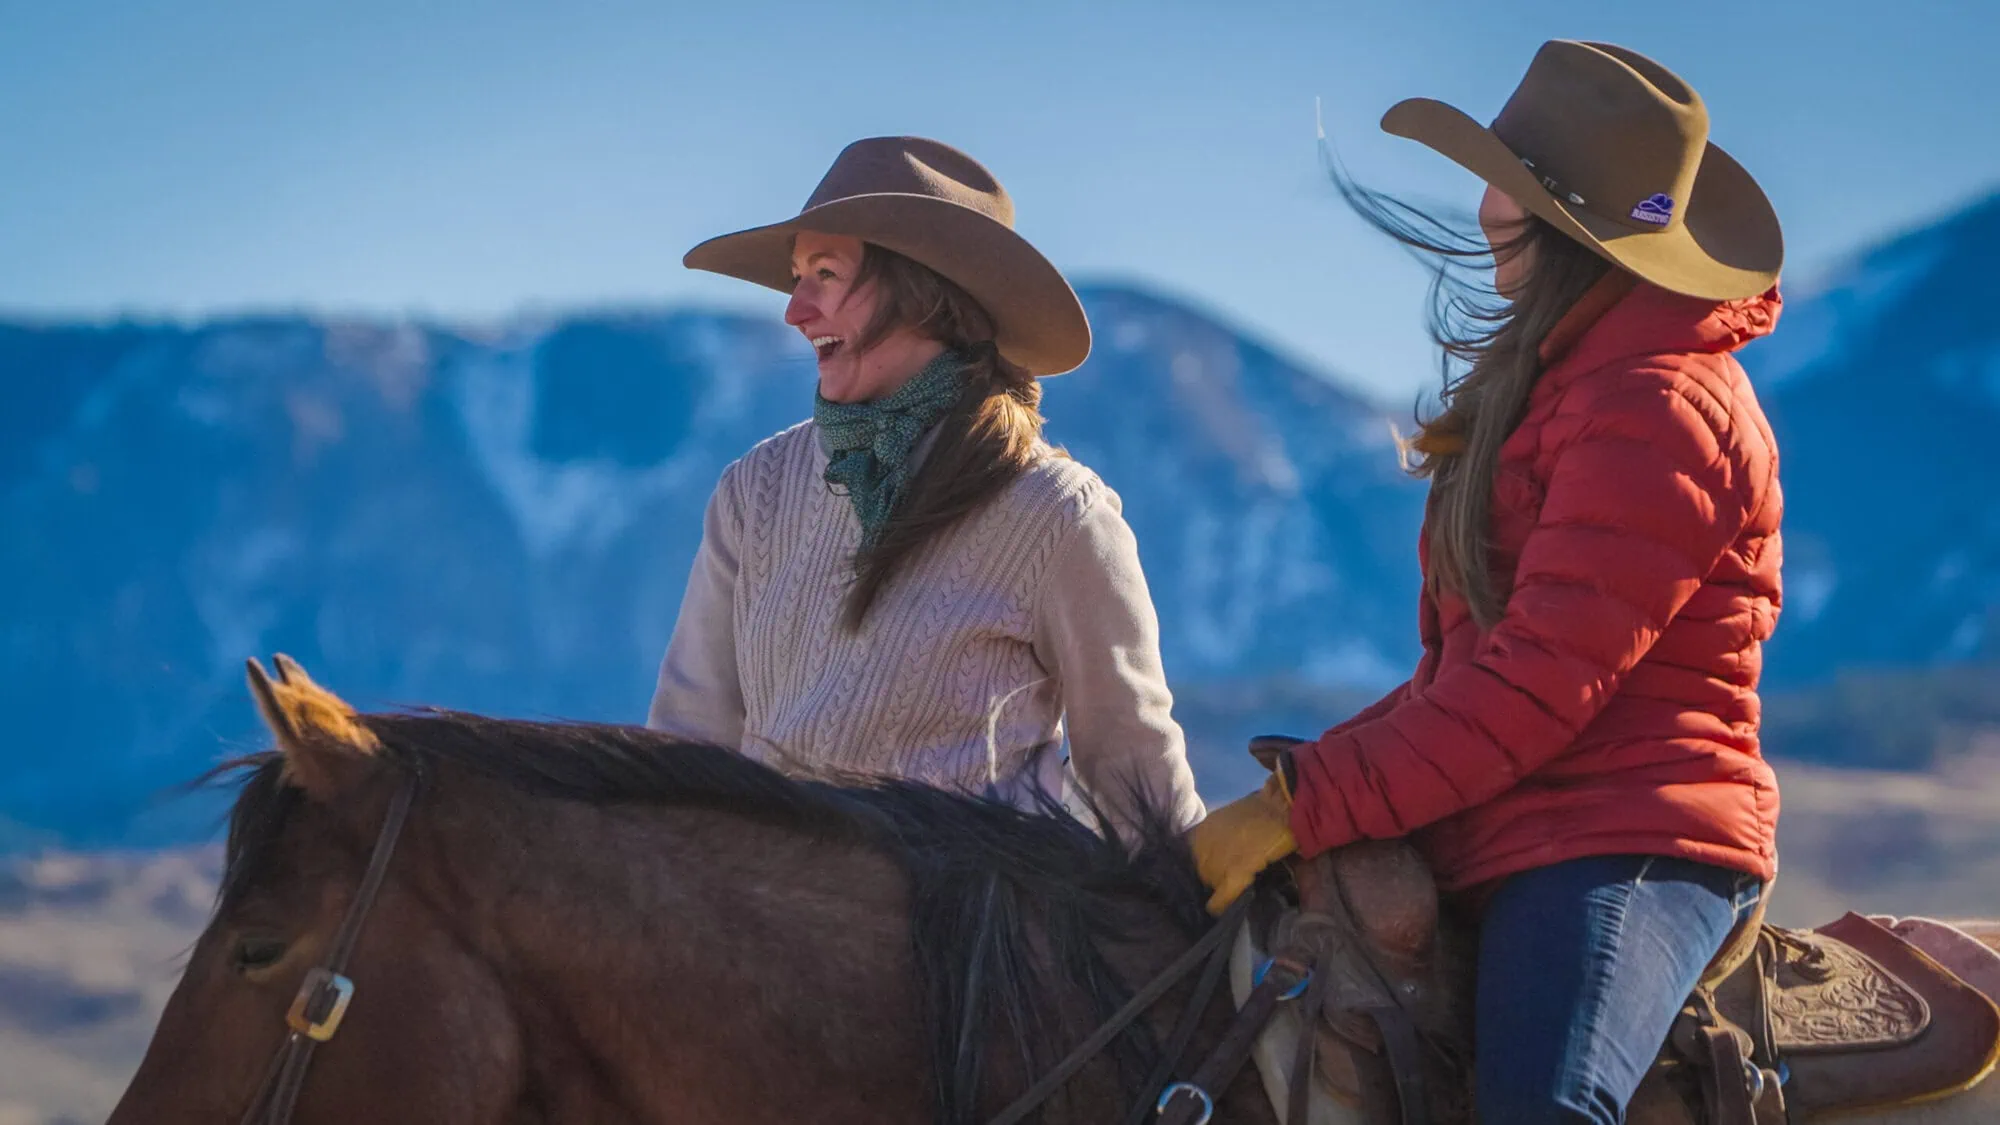 RanchHER Lindsey Anson and TV Host Janie Johnson on horseback at Pitchfork Ranch in Wyoming while filming RanchHER Season Two.